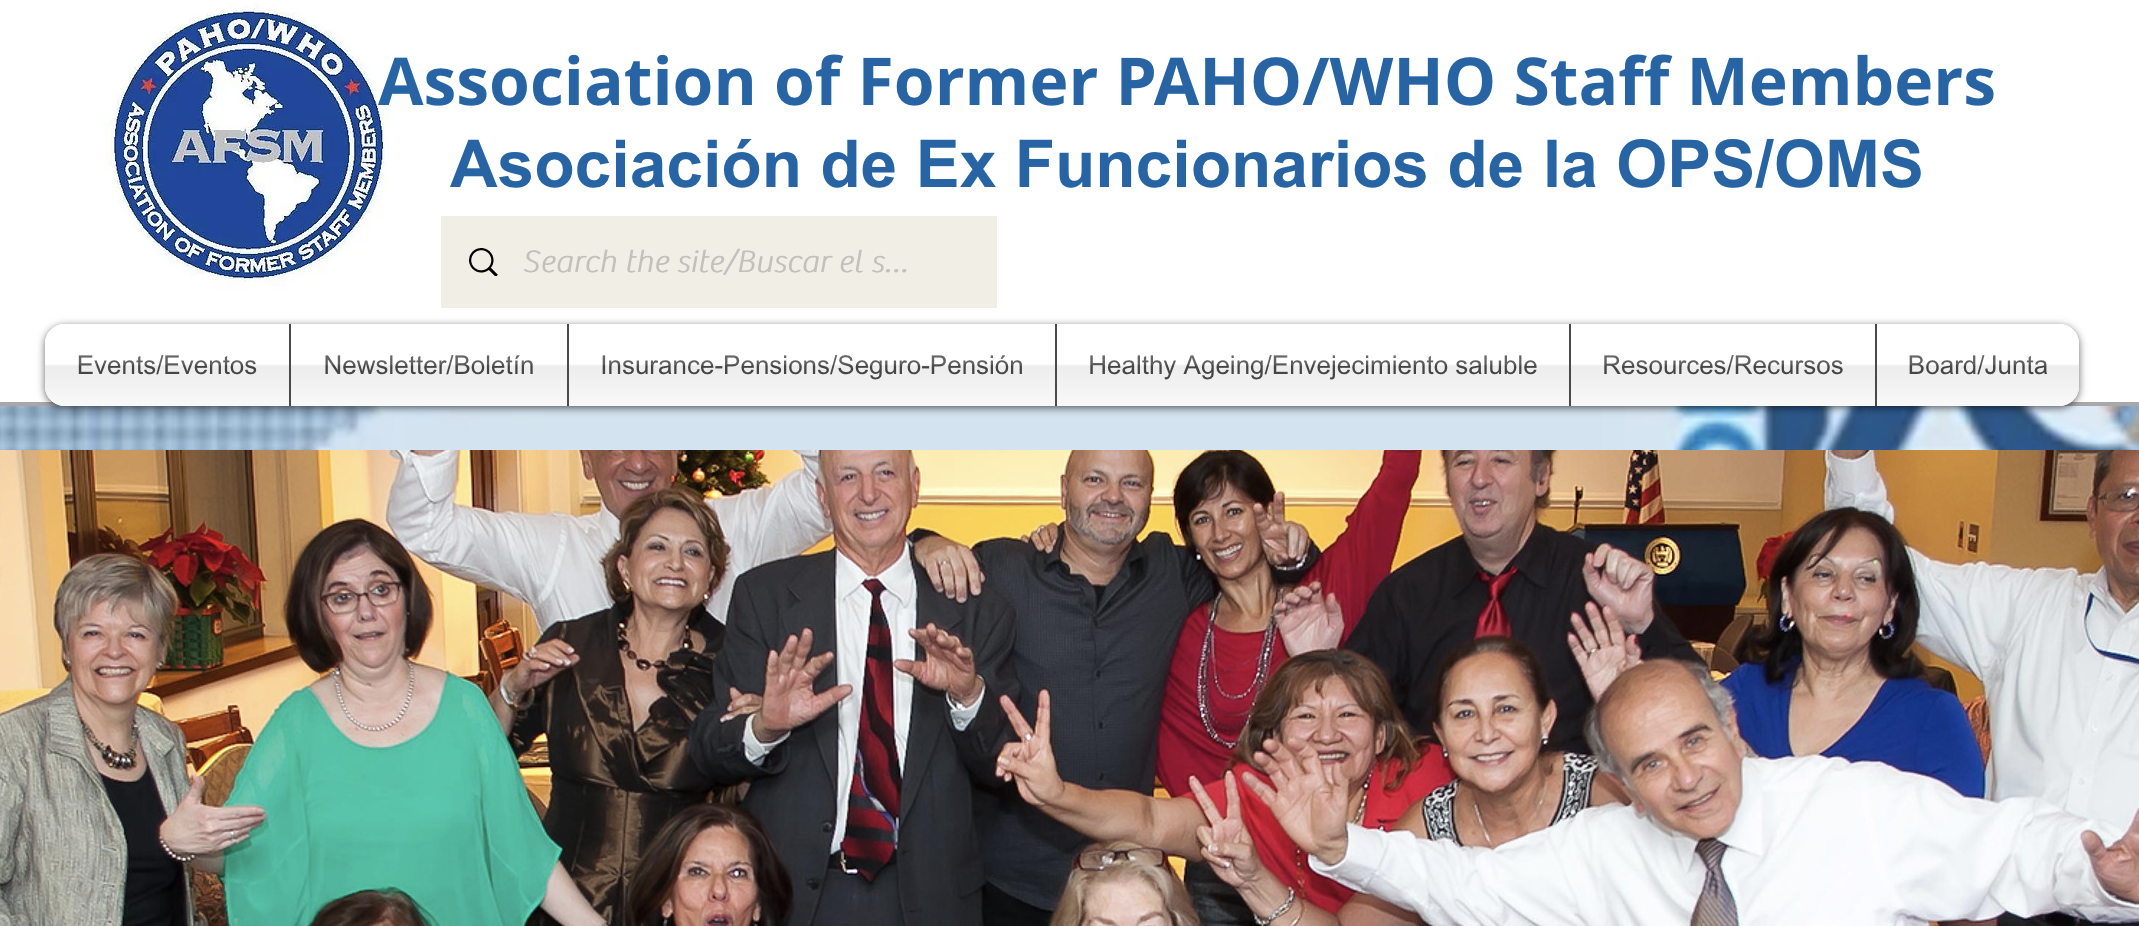 The Pan American Health Organization/World Health Organization Association of Former Staff Members website banner. Below it is a crowd of well-dressed elderly people of multiple races acting silly at a christmas party.